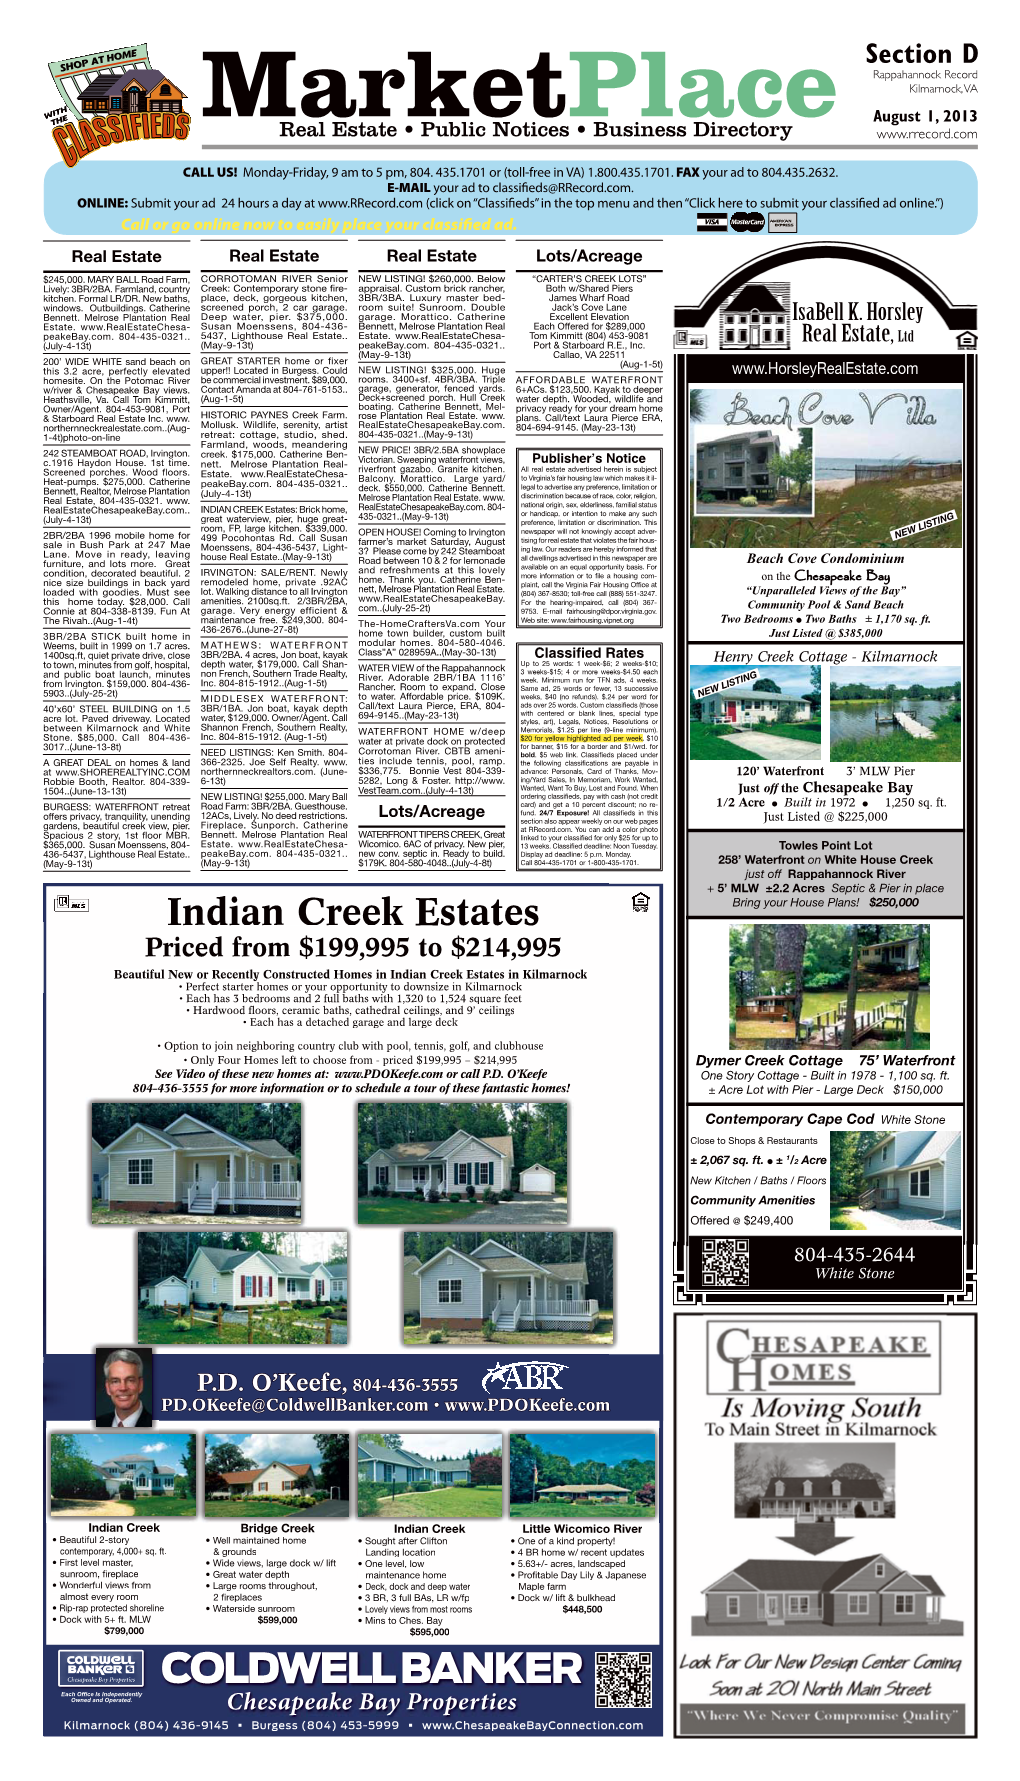 Rappahannock Record, August 1, 2013, Section D